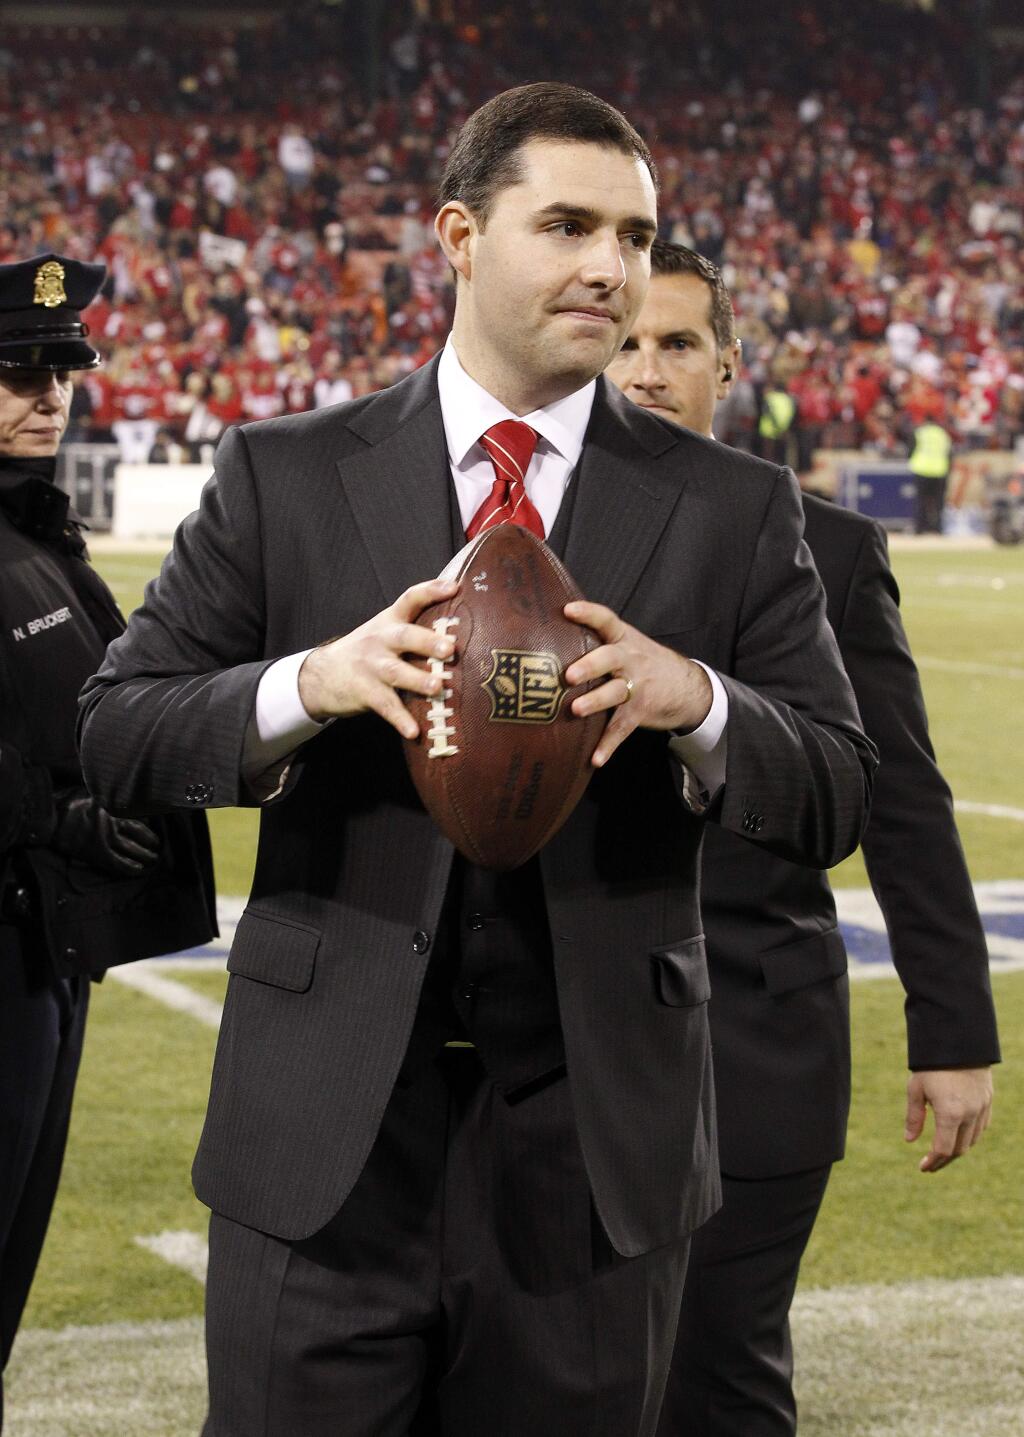 San Francisco 49ers owner Jed York walks off the field at Candlestick Park after an NFL football game against the Atlanta Falcons in San Francisco, Monday, Dec. 23, 2013. (AP Photo/Tony Avelar)